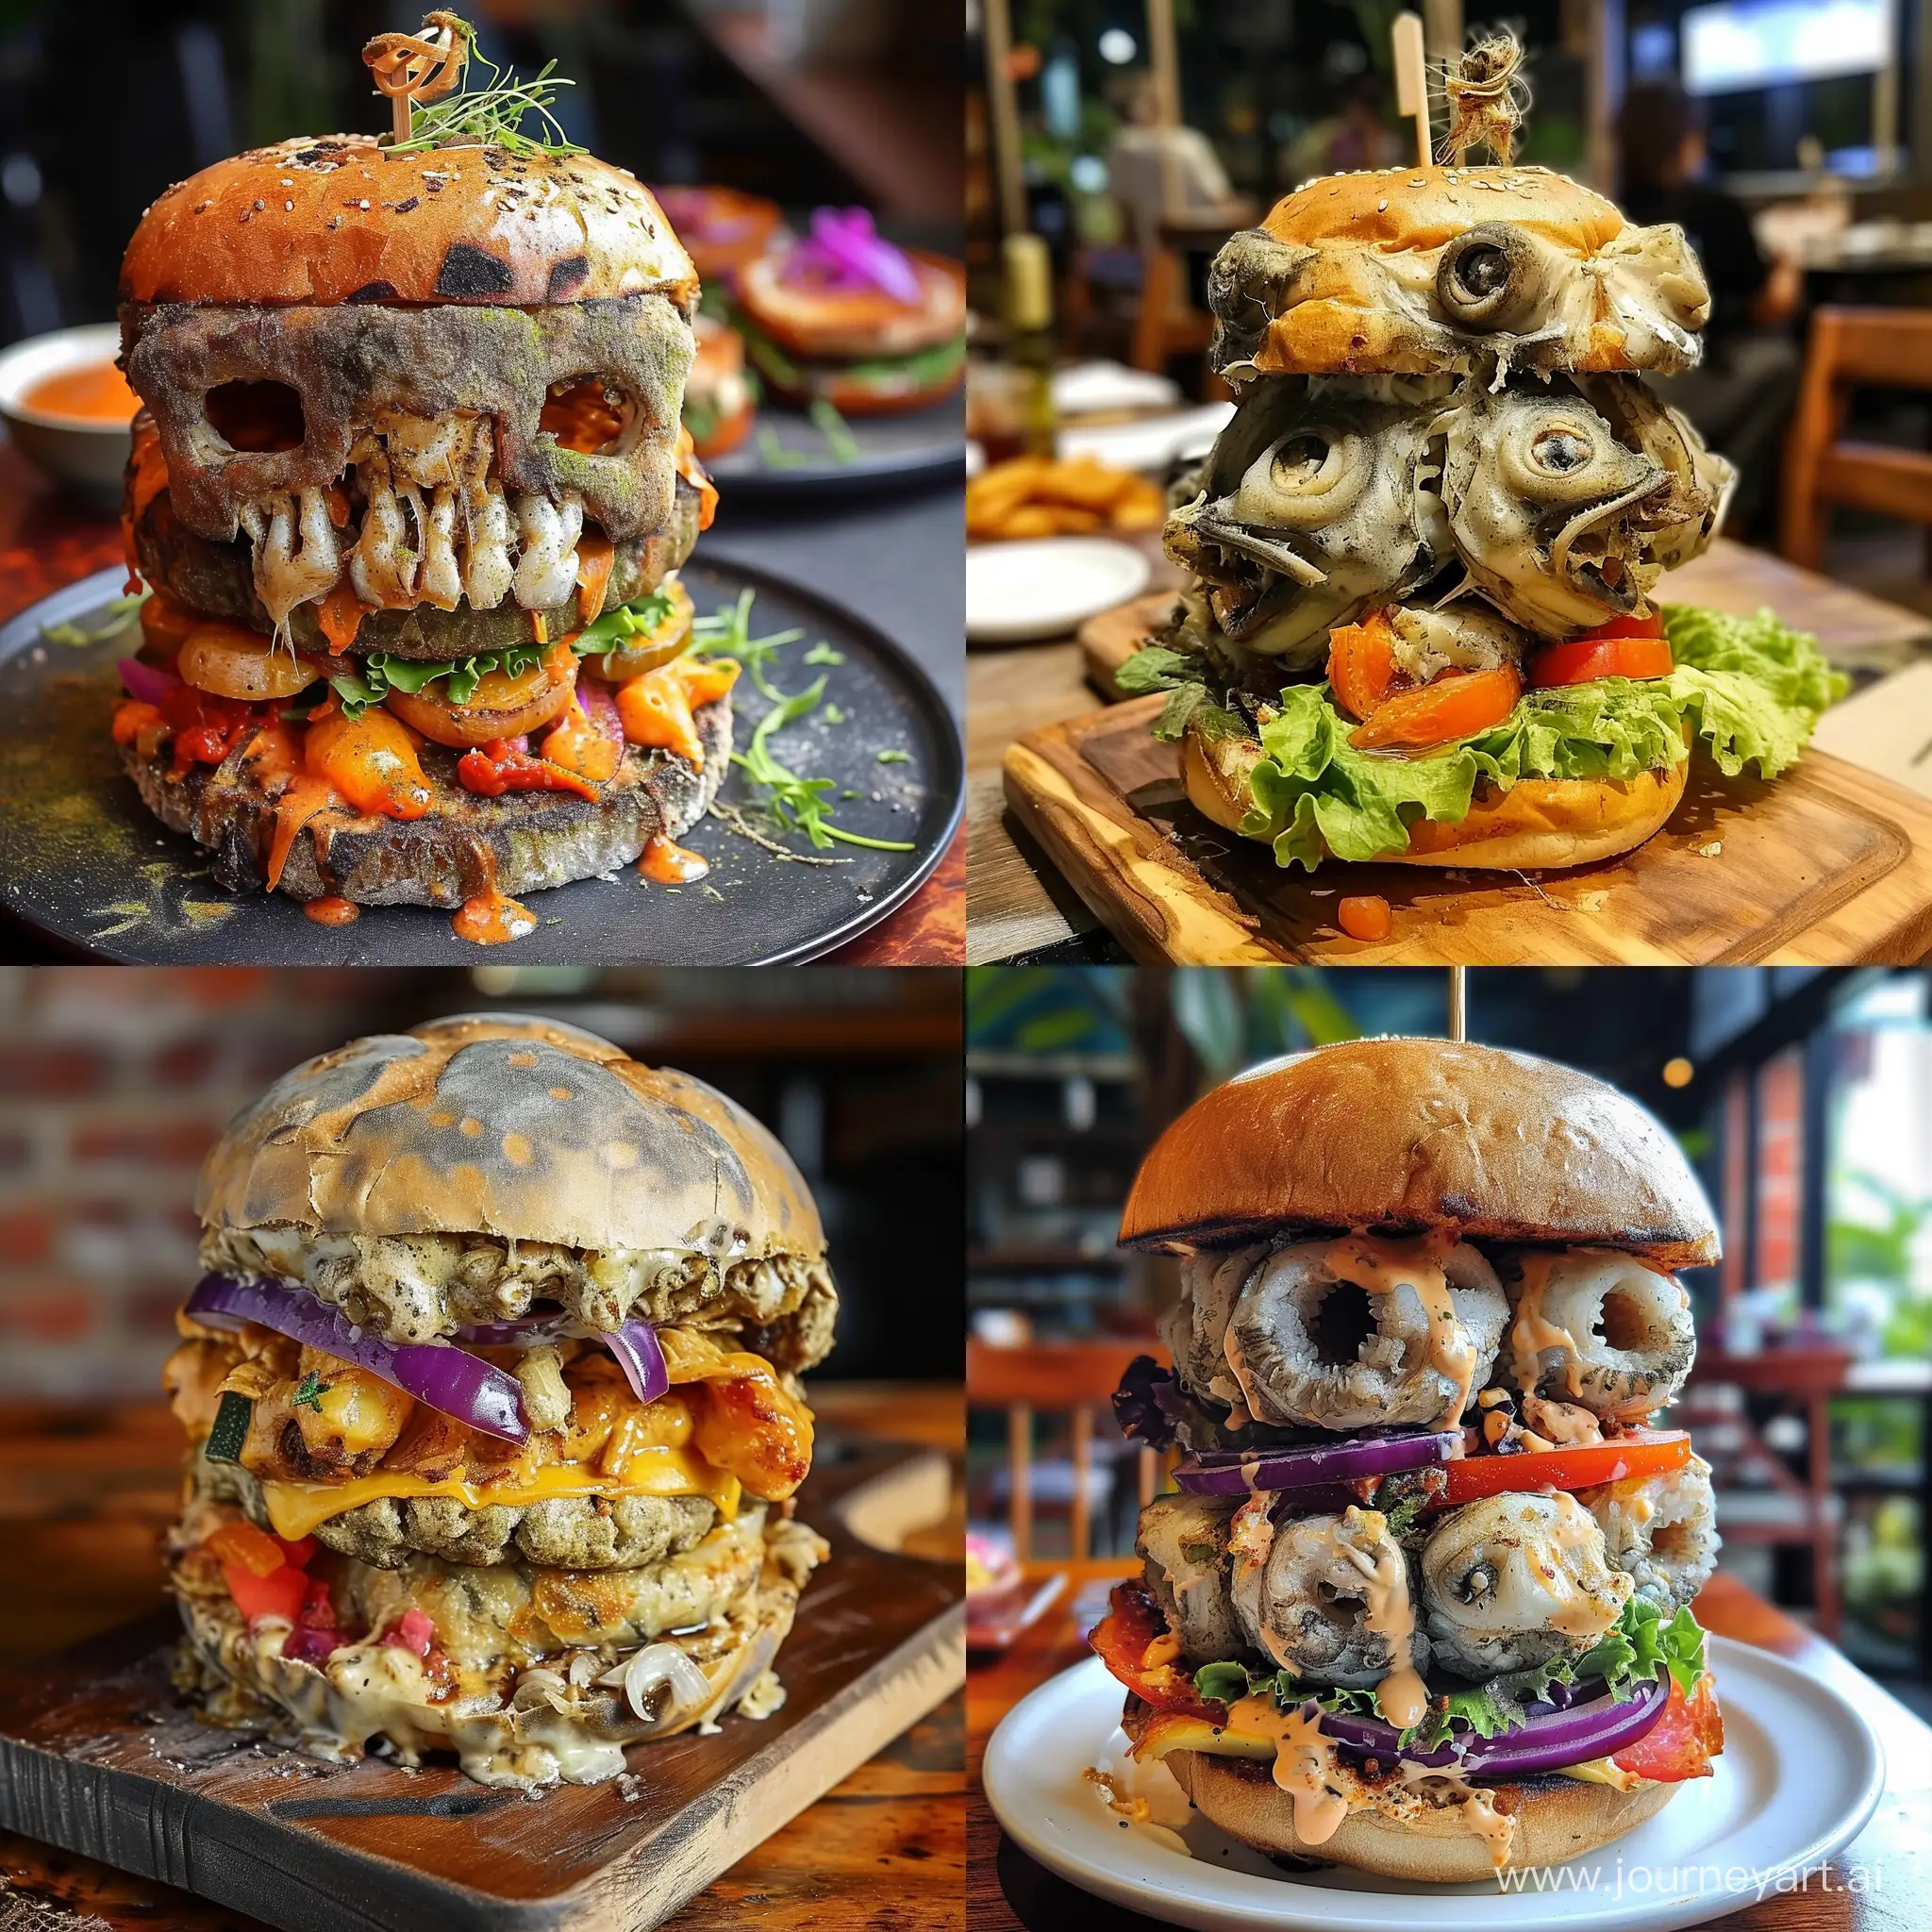 Repulsive-Fish-Head-Burger-with-Rotten-Vegetables-and-Moldy-Bread